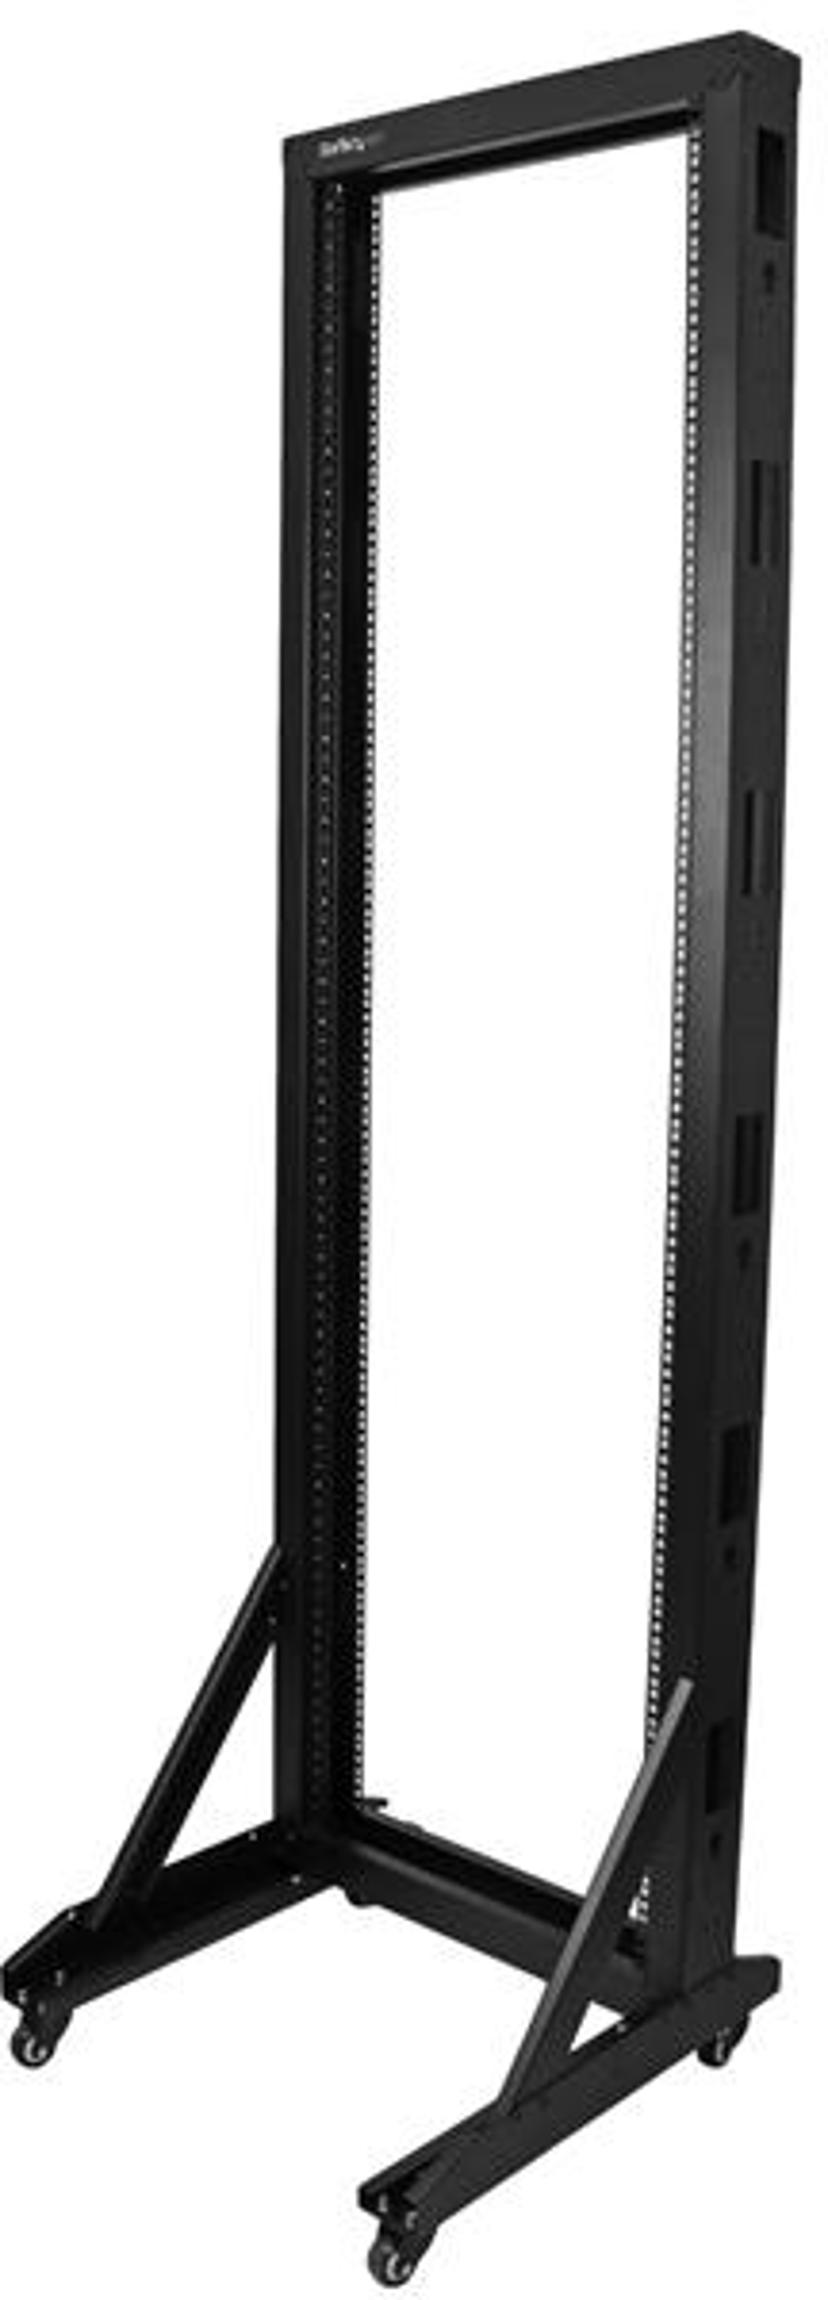 Startech 2-Post Rack for Server Equipment with Casters